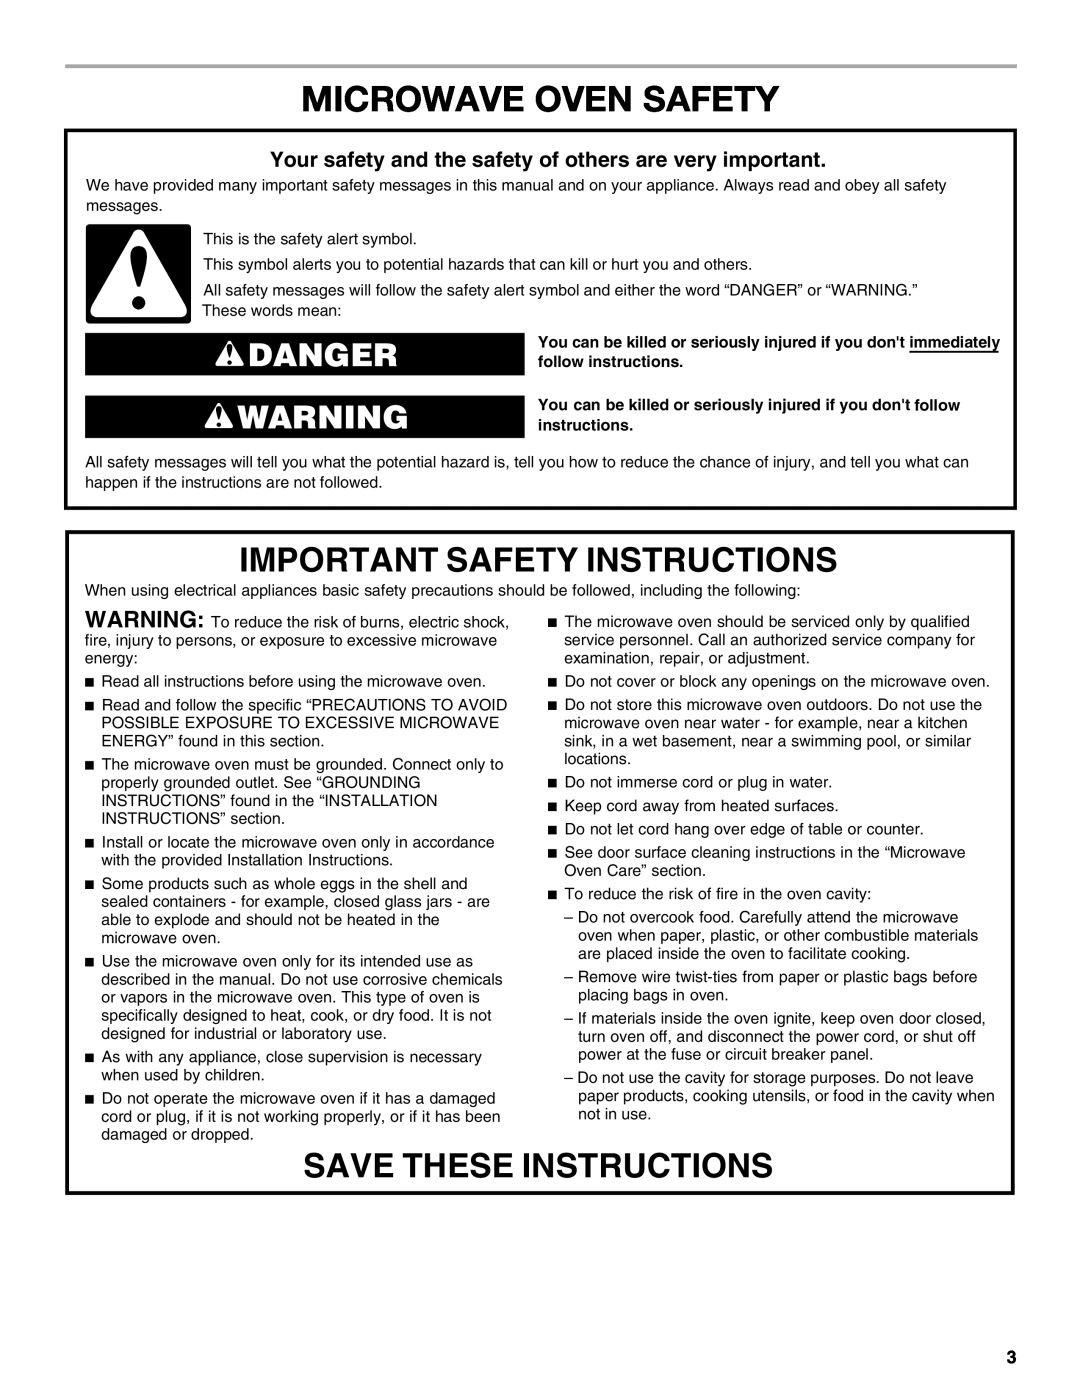 Whirlpool WMC50522 manual Microwave Oven Safety, Important Safety Instructions, Save These Instructions, Danger 